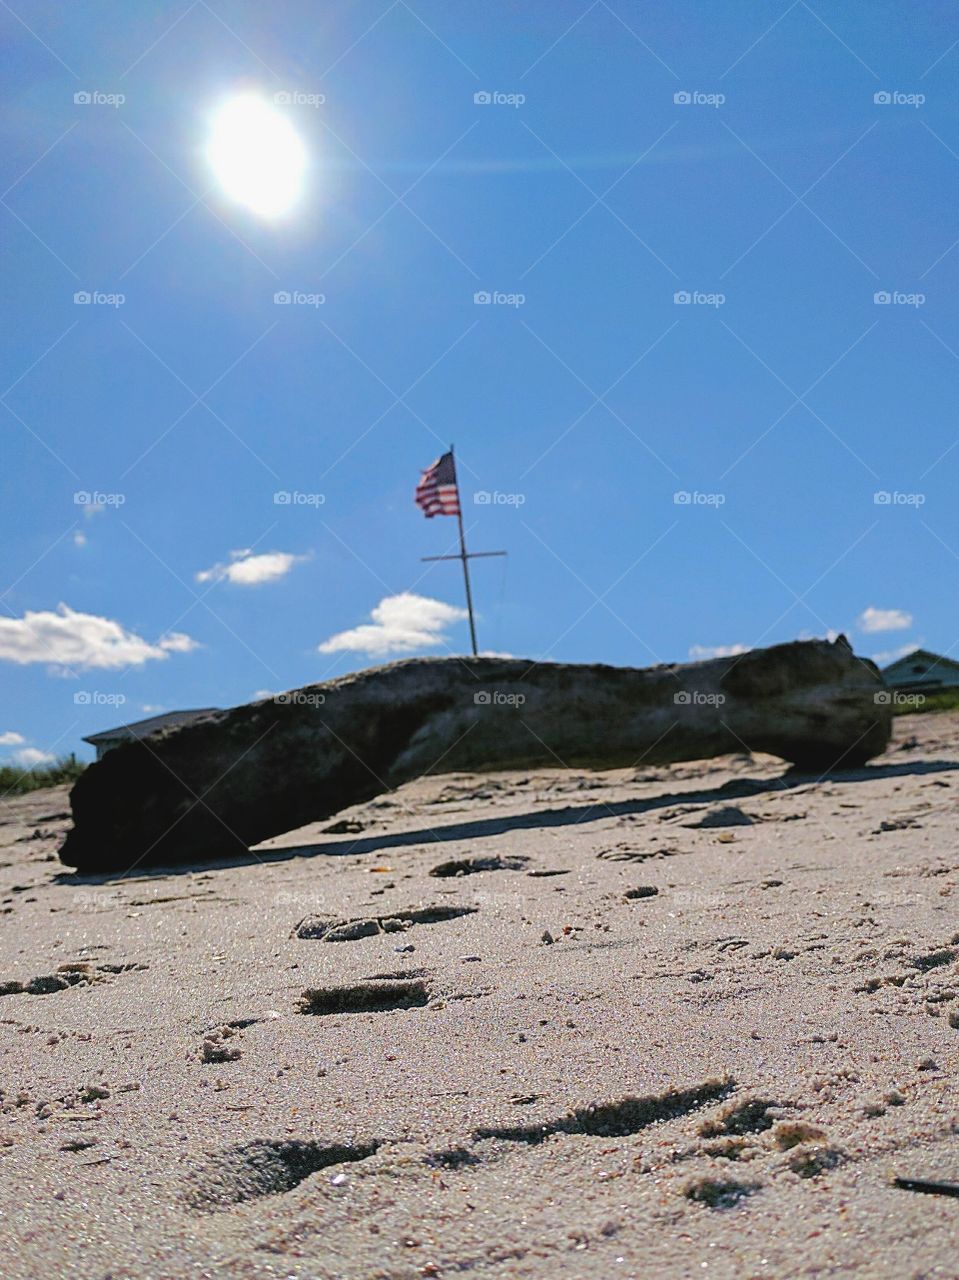 large log drifted up onto the beach with an American flag in the background